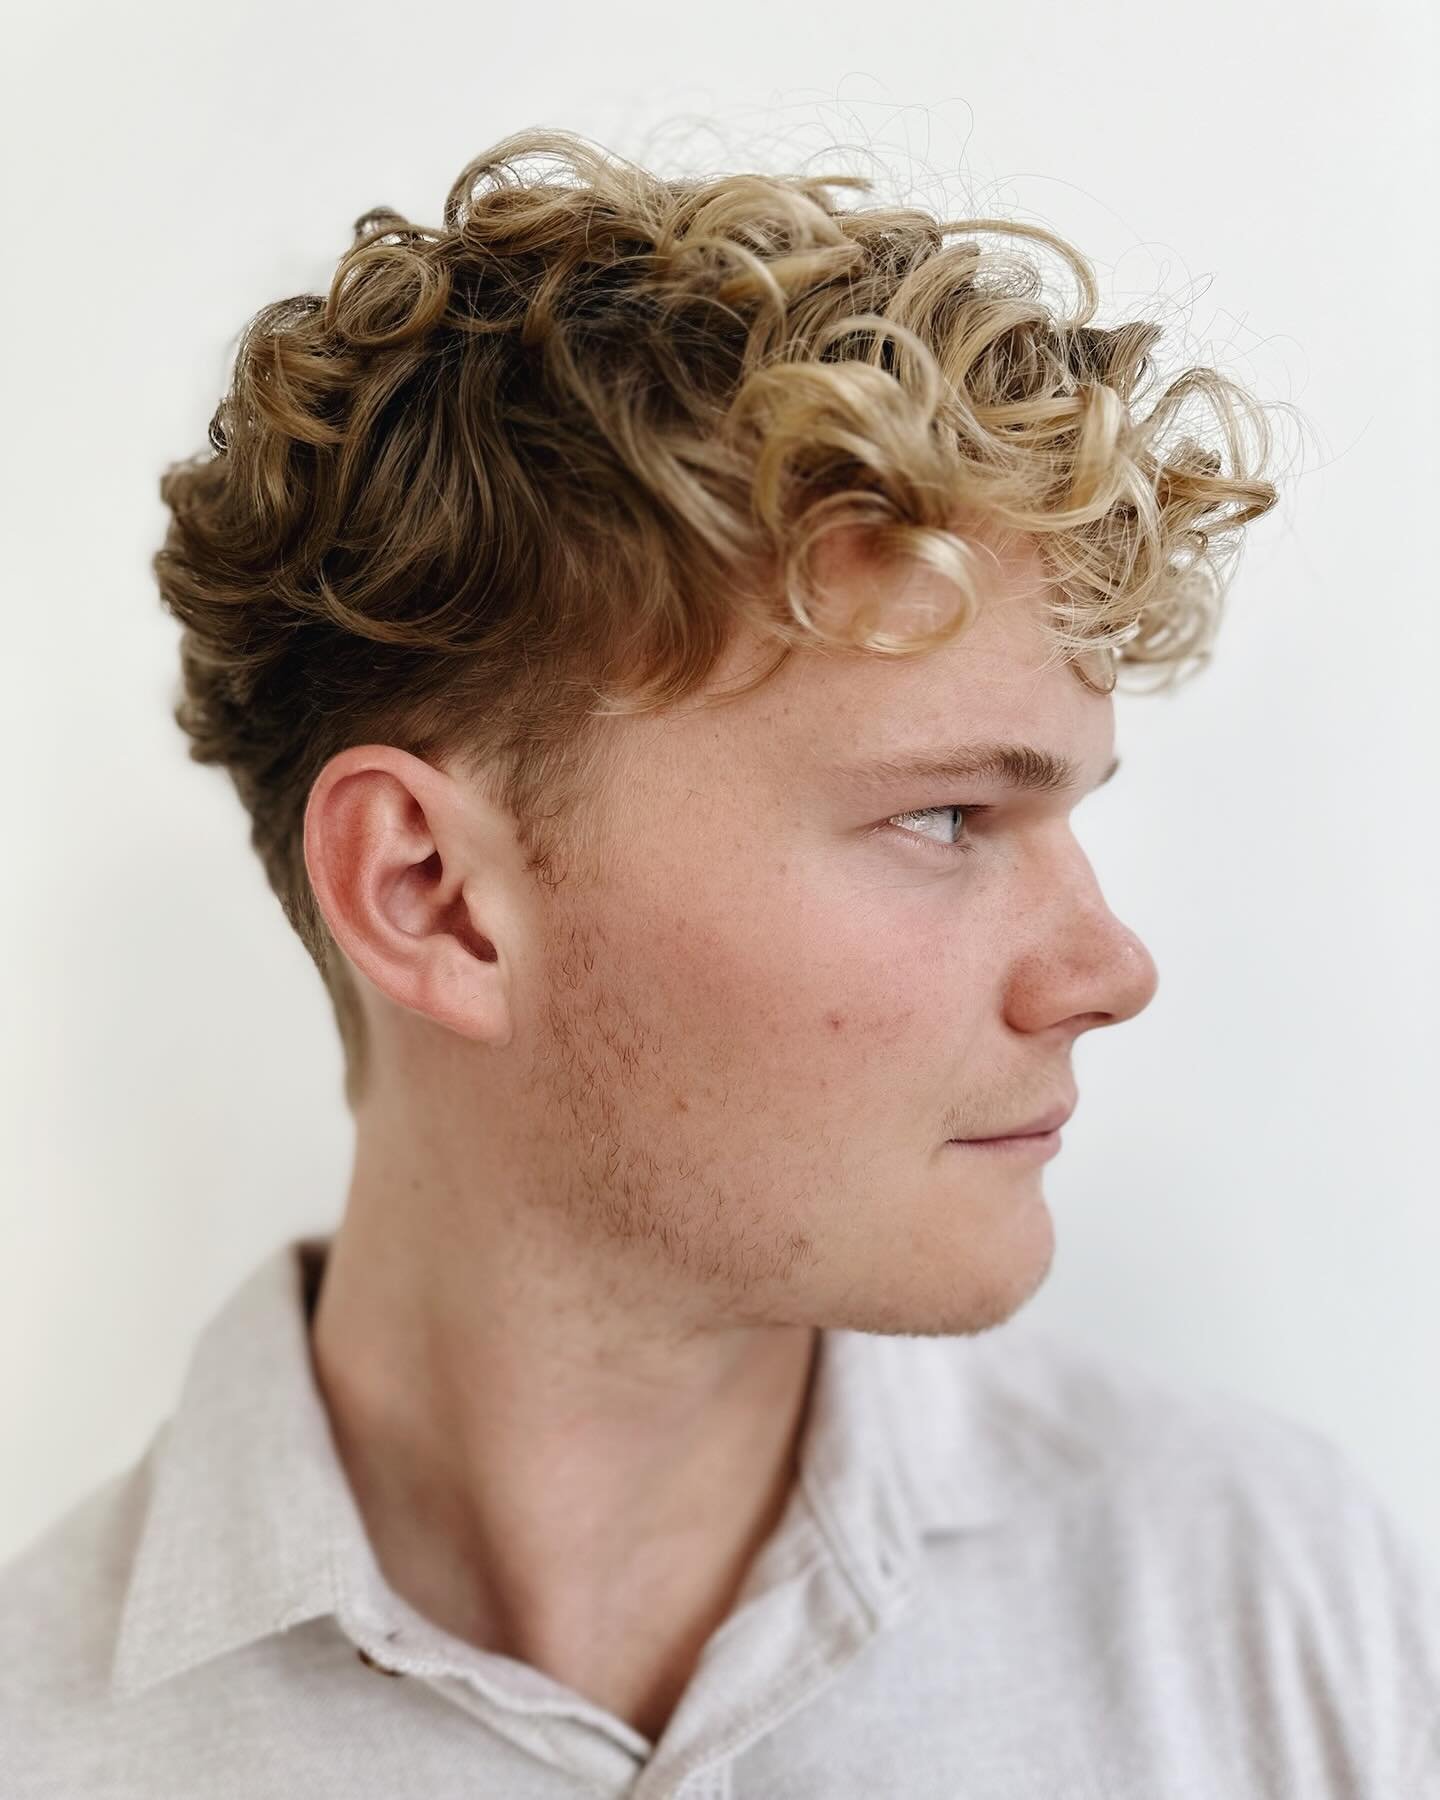 @dnohair taming curls, giving them their best life, and miiiight have some time next week if you&rsquo;re lucky! Click the button in our profile, book online, or call for guarenteed good  hair days ahead.